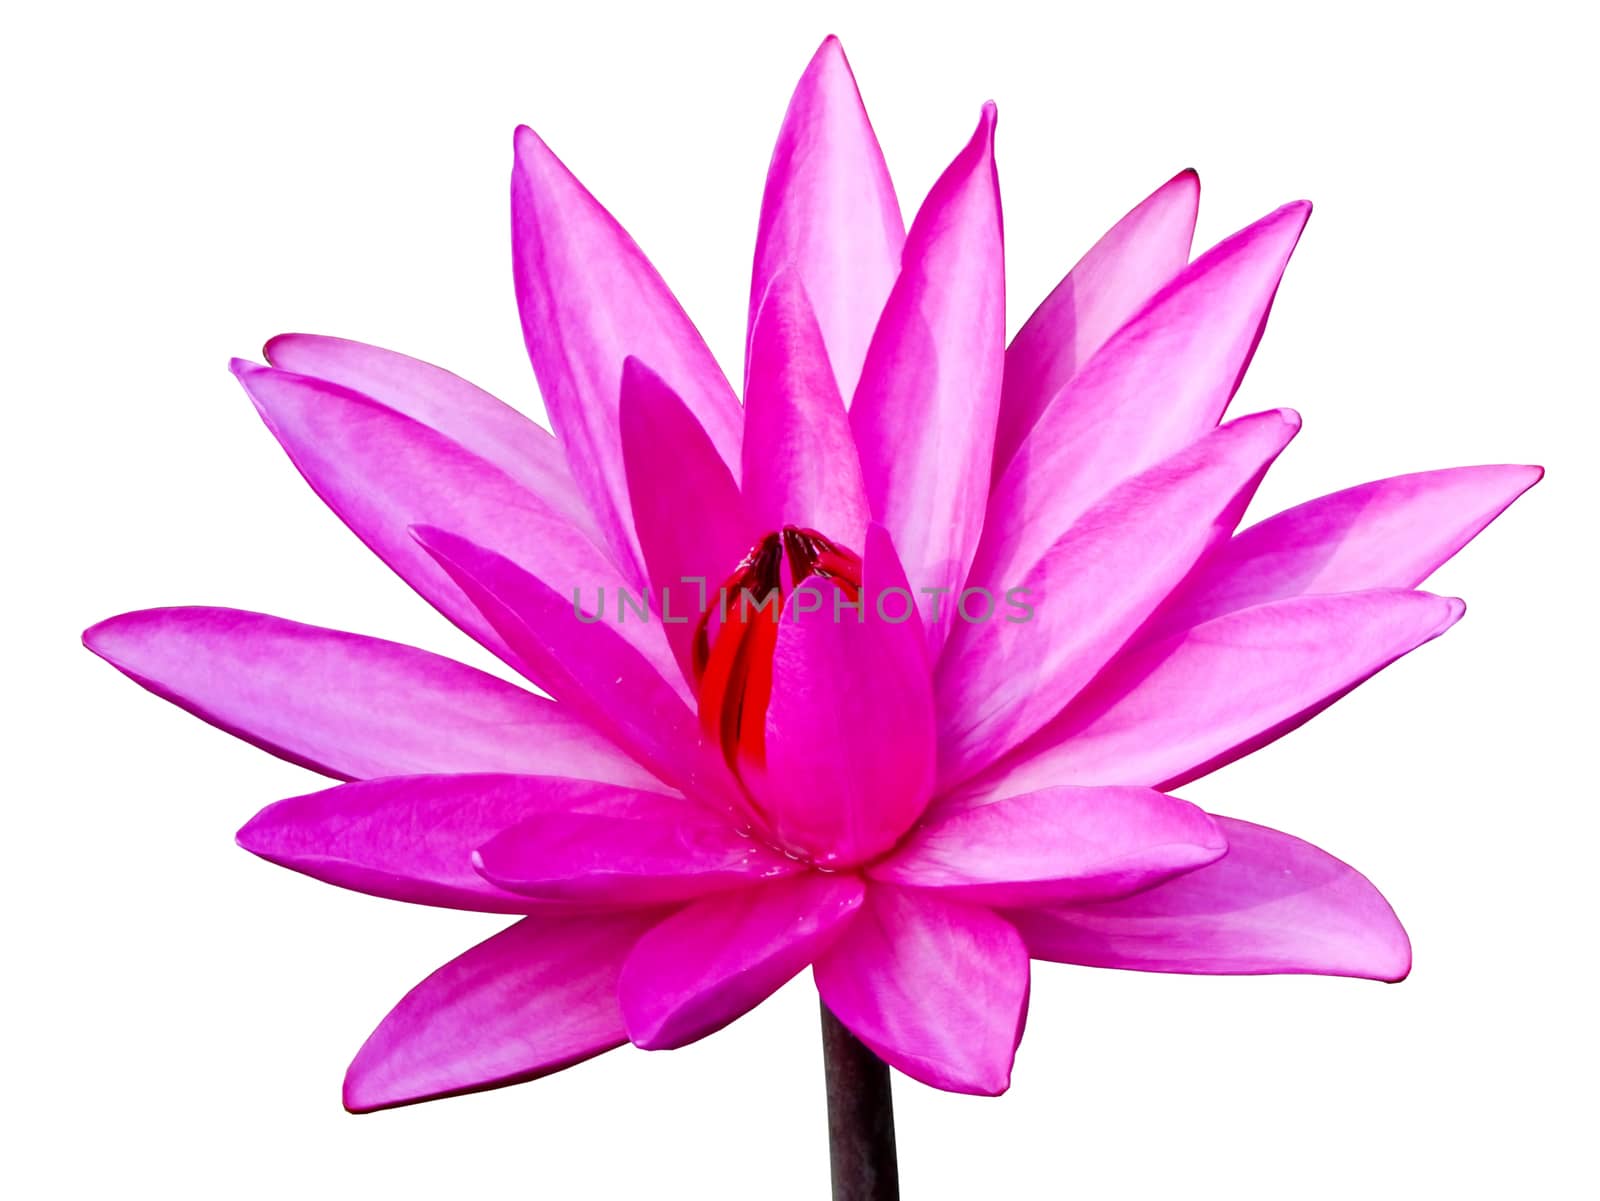 Water lily on white background.